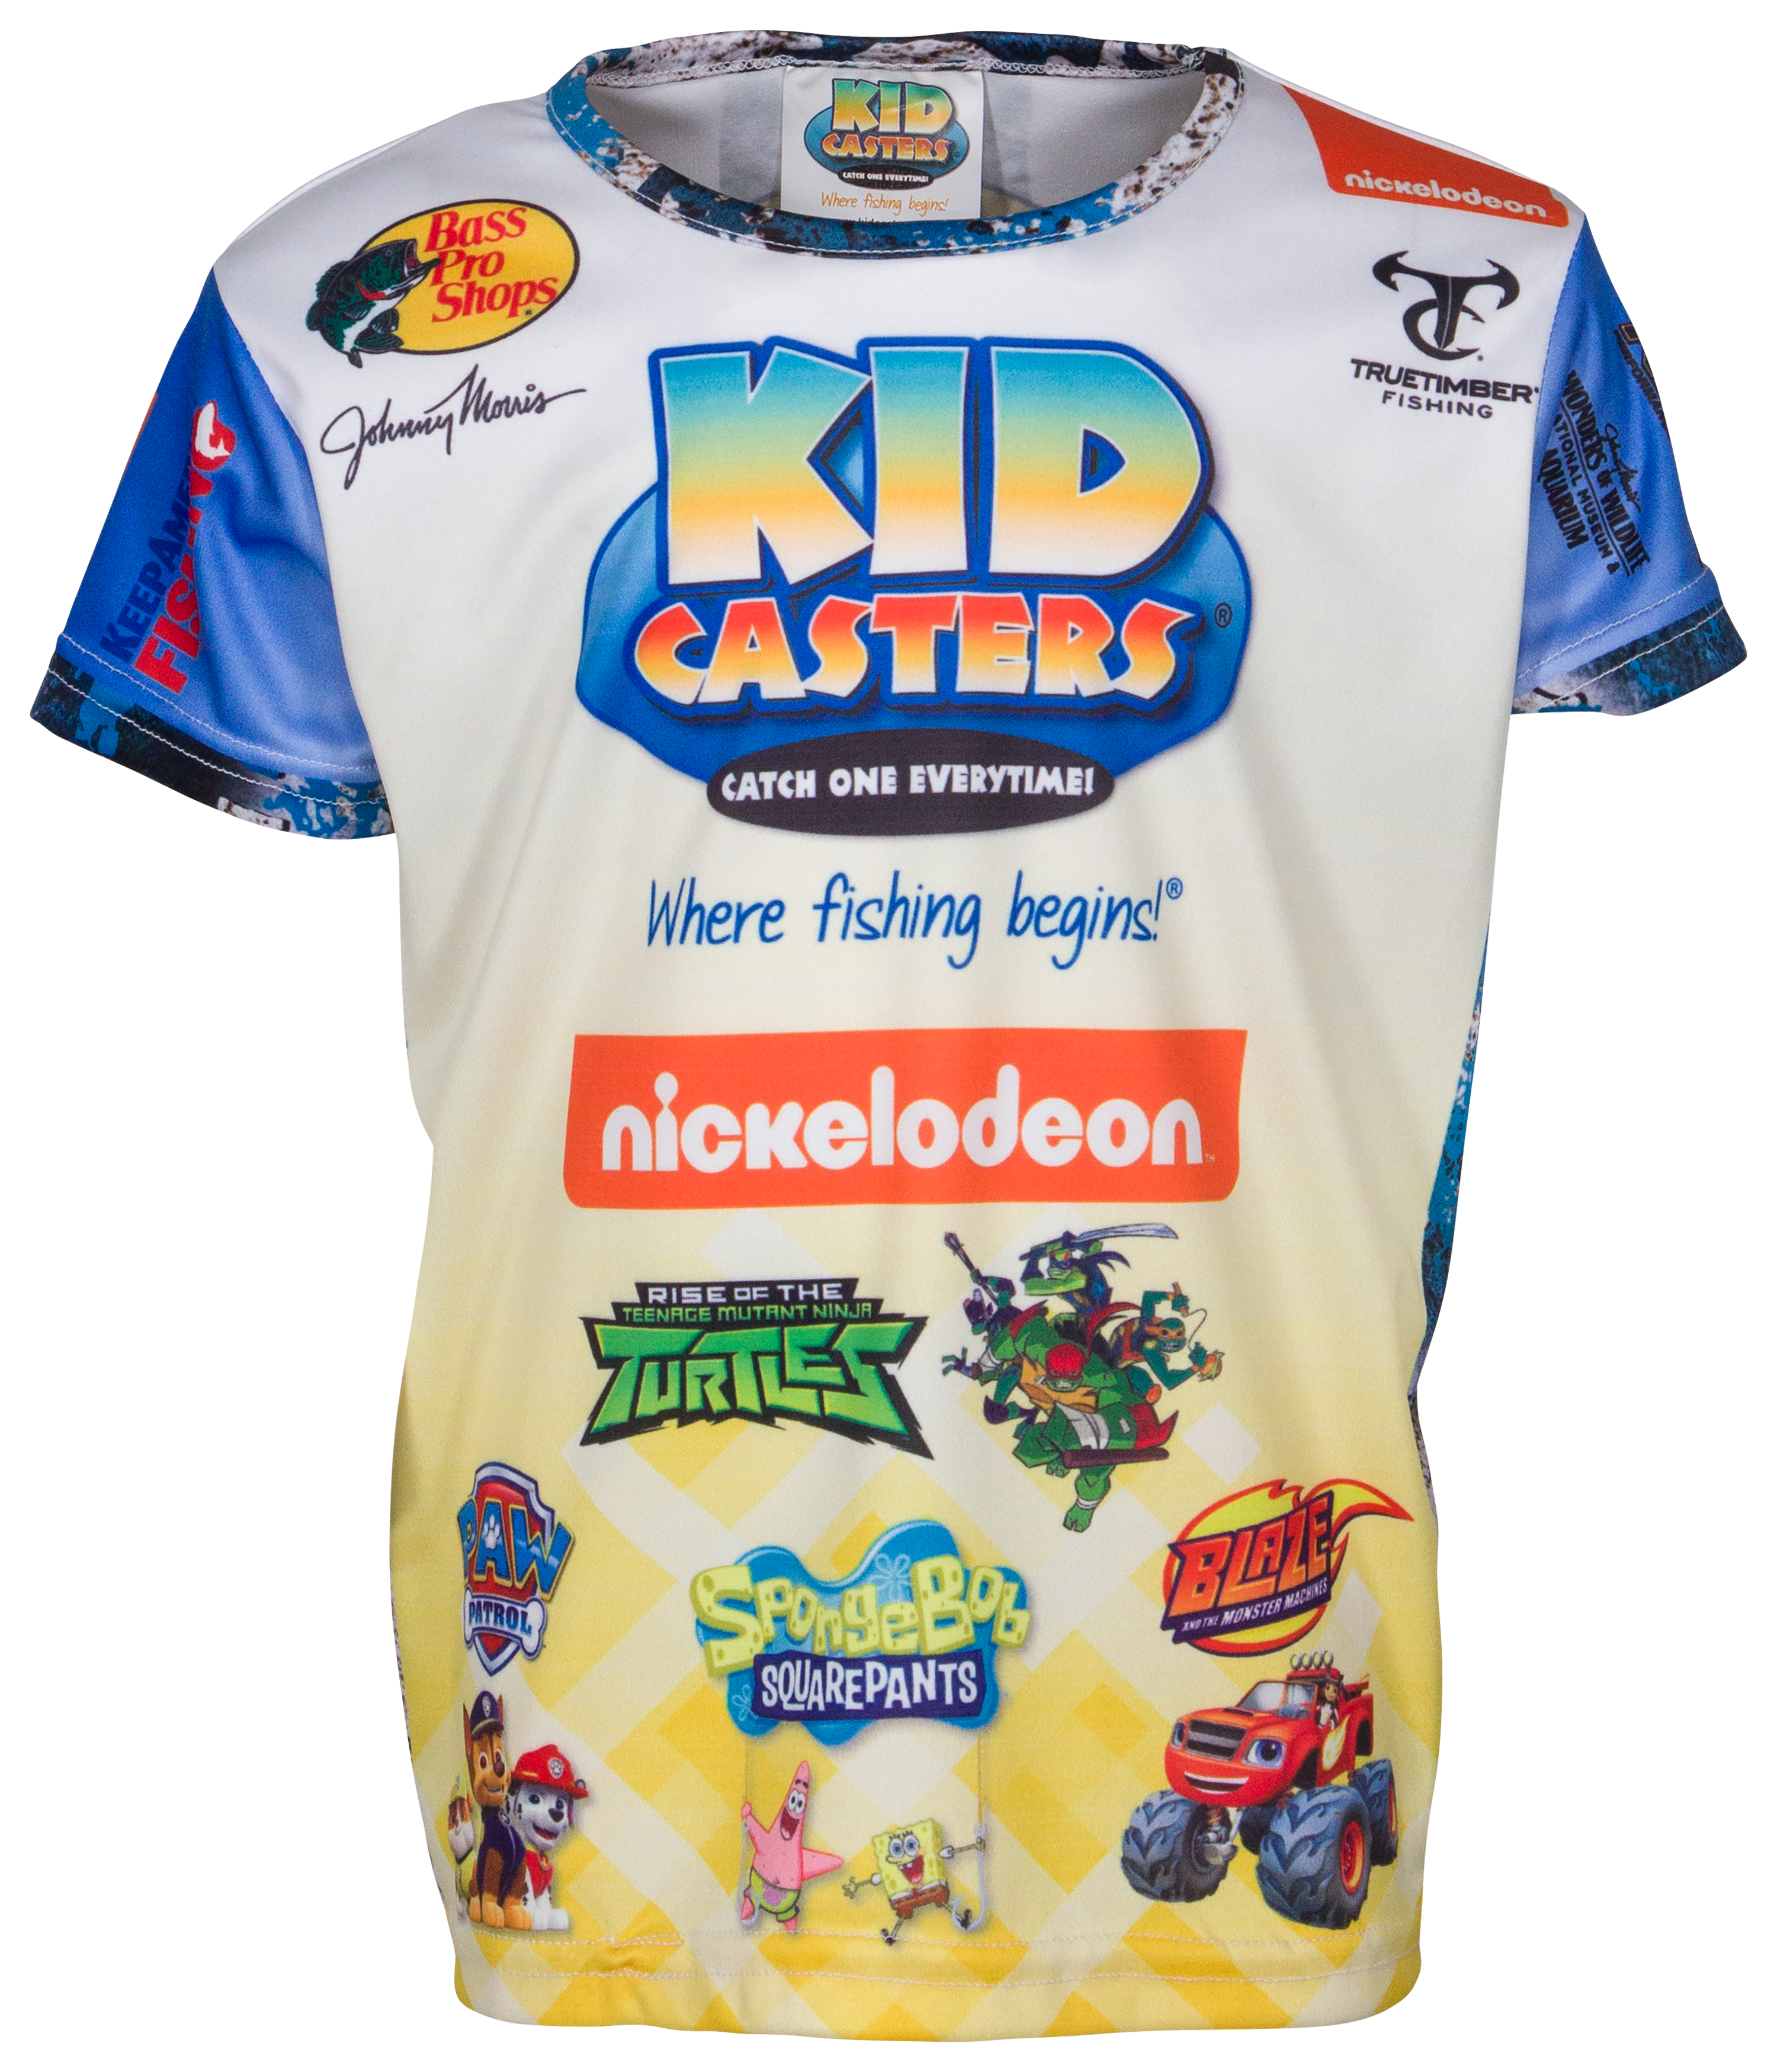 Bass Pro Shops Kid Casters Fishing Short-Sleeve Shirt for Toddlers or Boys - Yellow - S